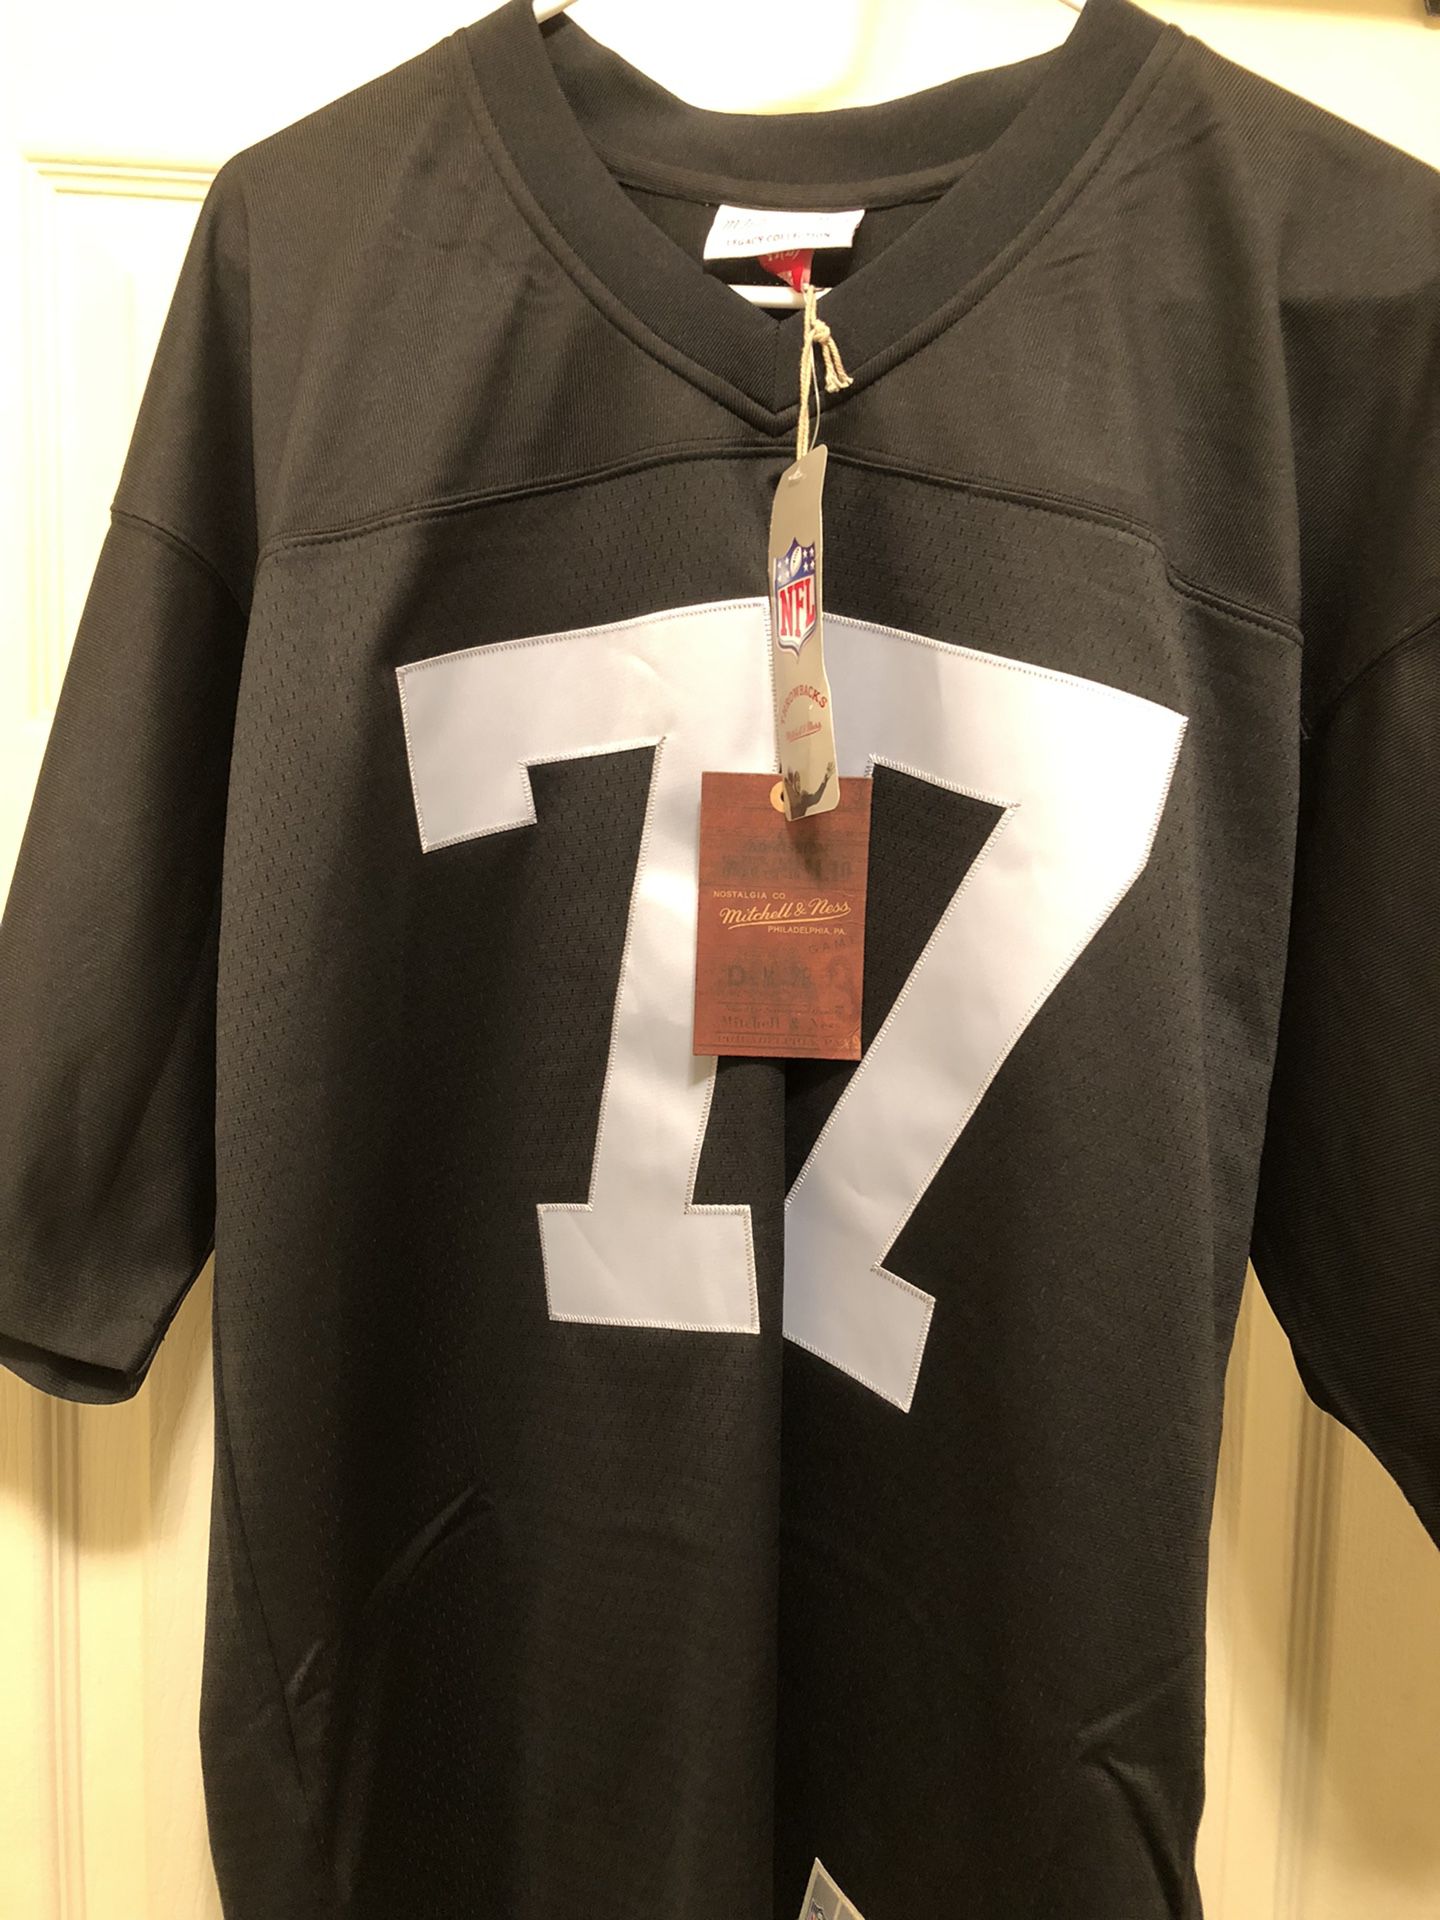 Lyle Alzado Jersey (Large) for Sale in Manteca, CA - OfferUp